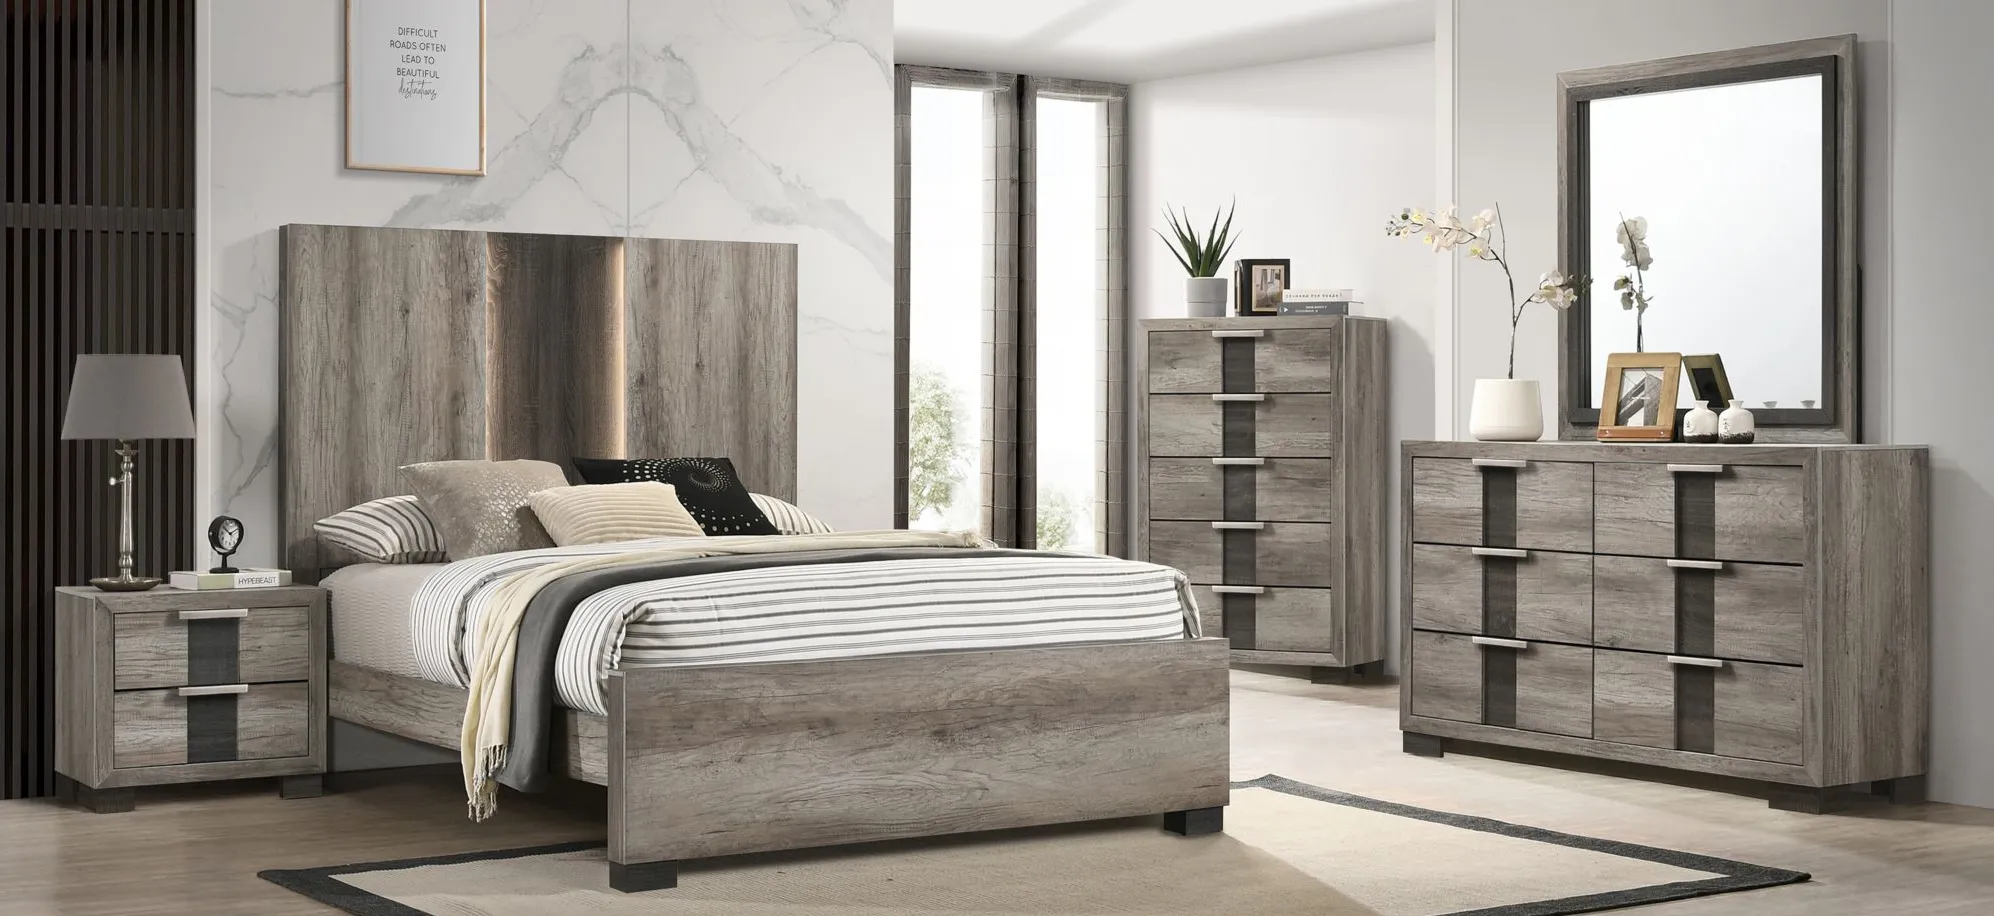 Rangley 5-Pc Queen Bedroom Set in Paper - Gray / Brown 2-Tone by Crown Mark